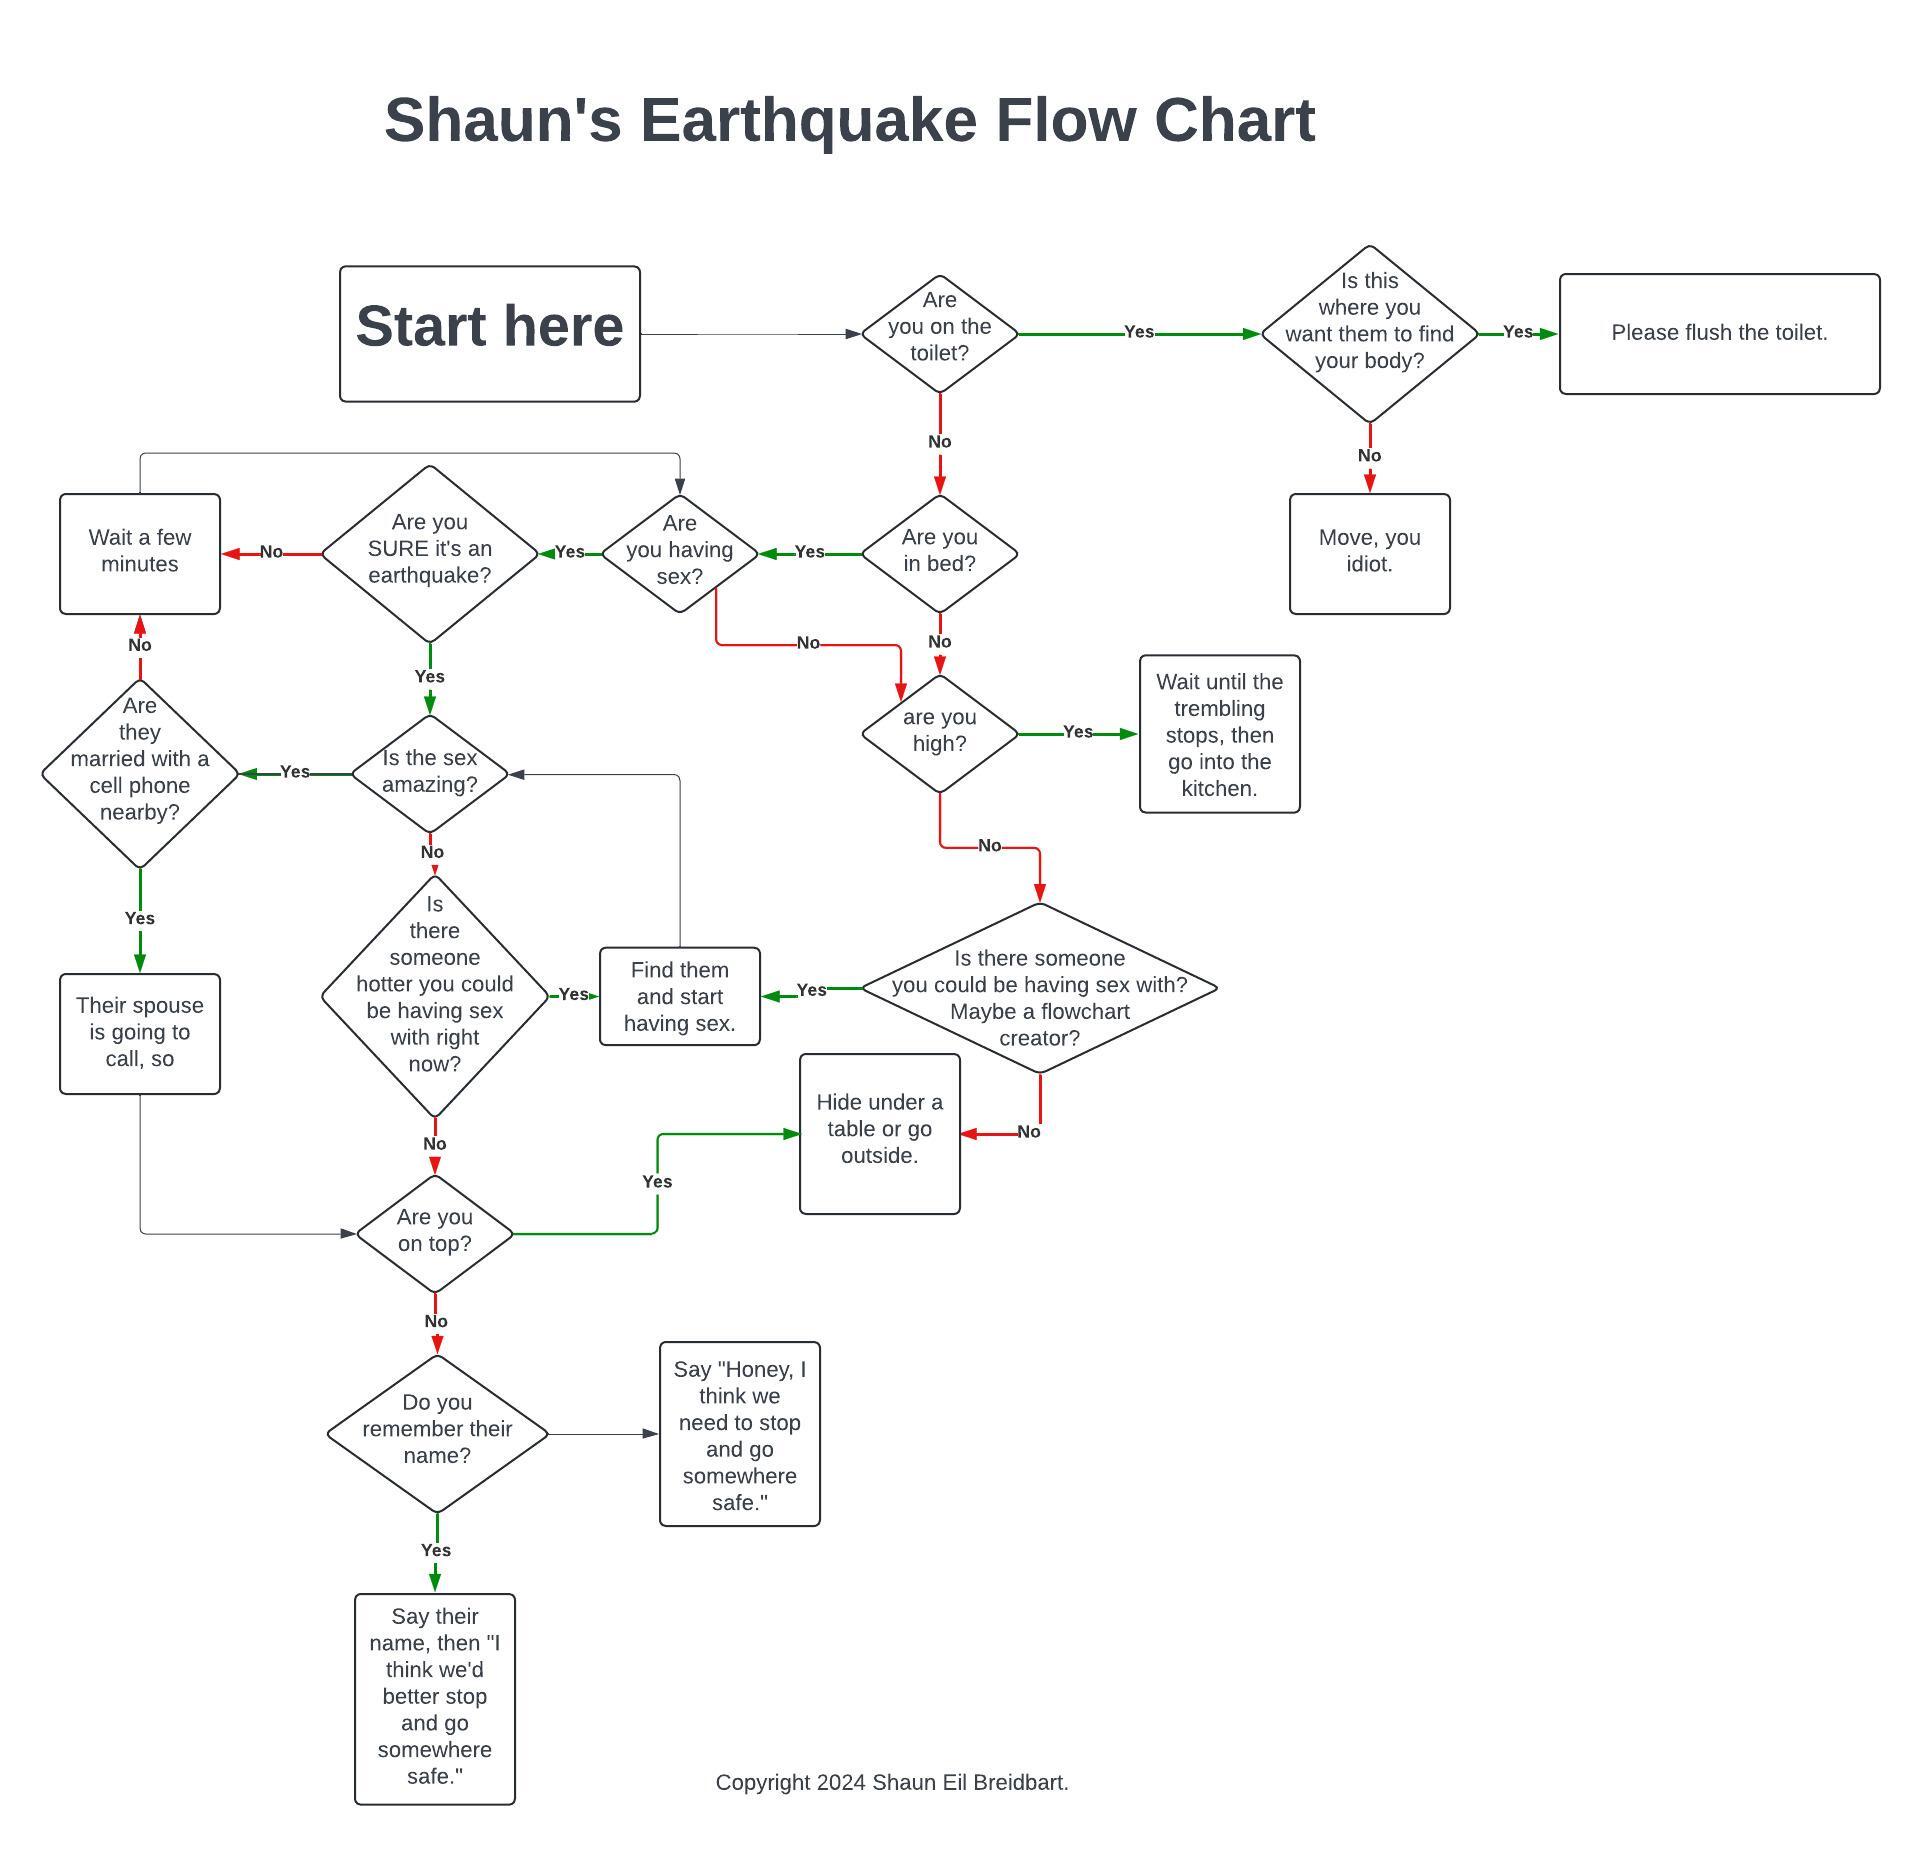 It's a flowchart with jokes about what to do in an earthquake